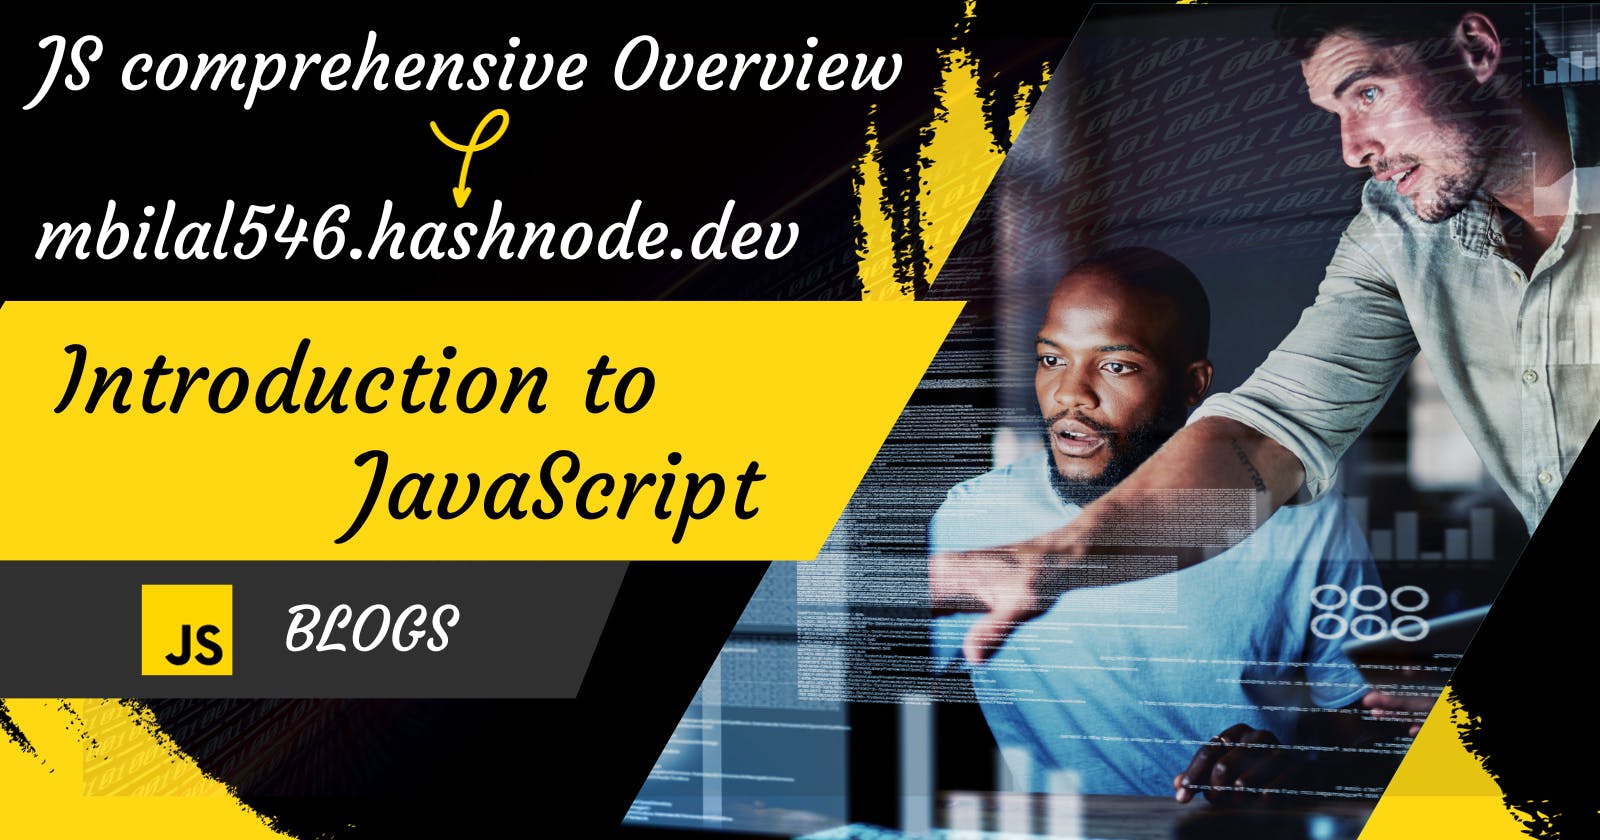 A Comprehensive Overview of JavaScript (Introduction to JavaScript)